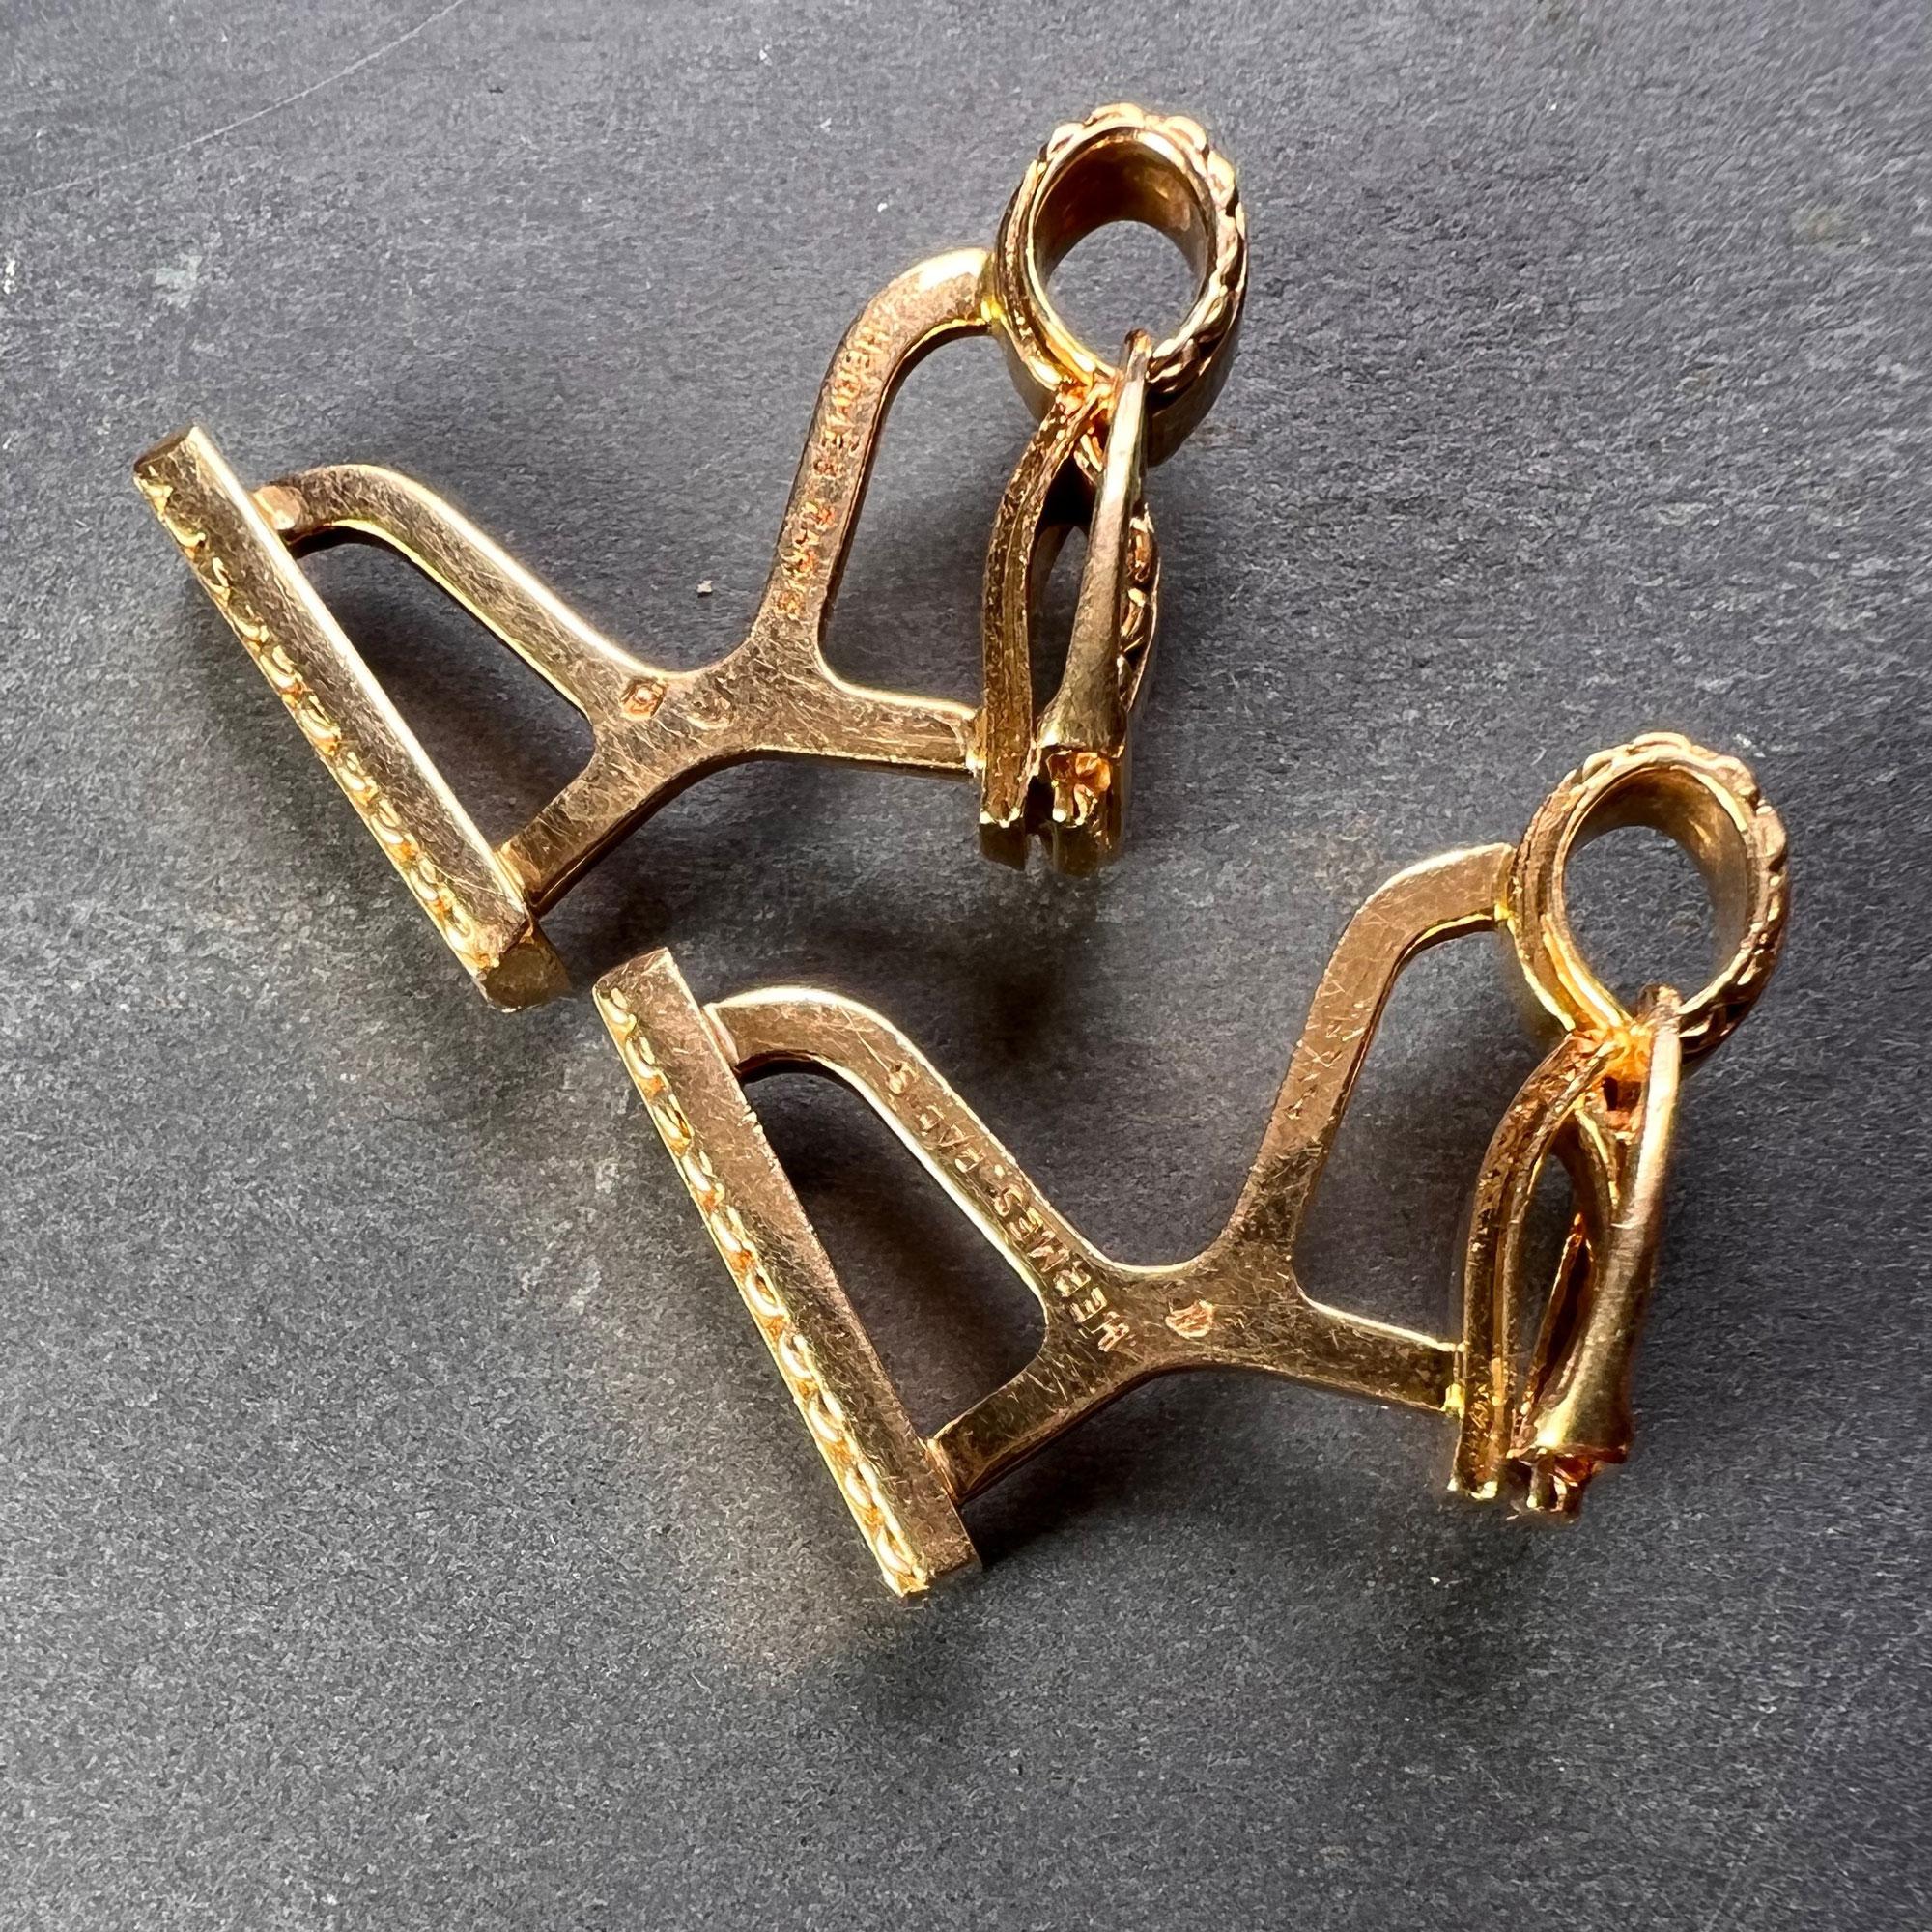 Hermes Paris French Stirrup 18K Yellow Gold Cufflinks For Sale 2